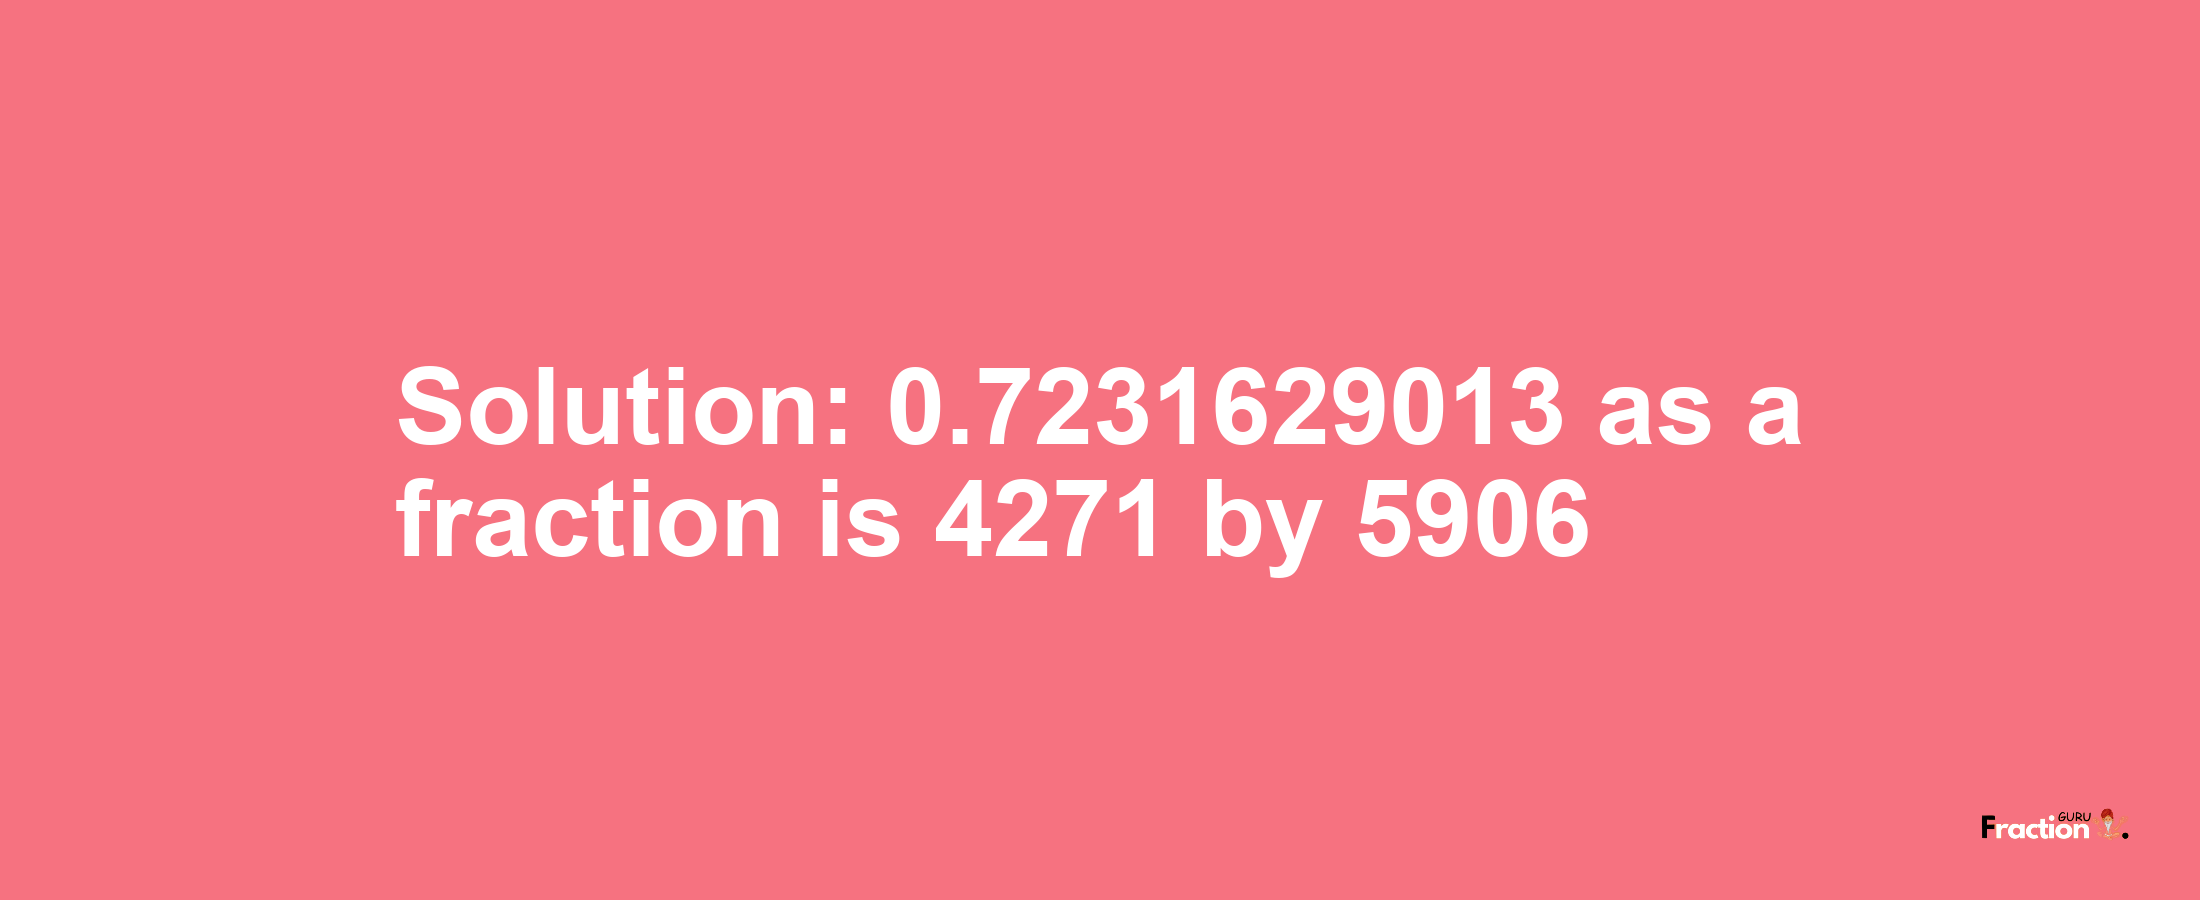 Solution:0.7231629013 as a fraction is 4271/5906